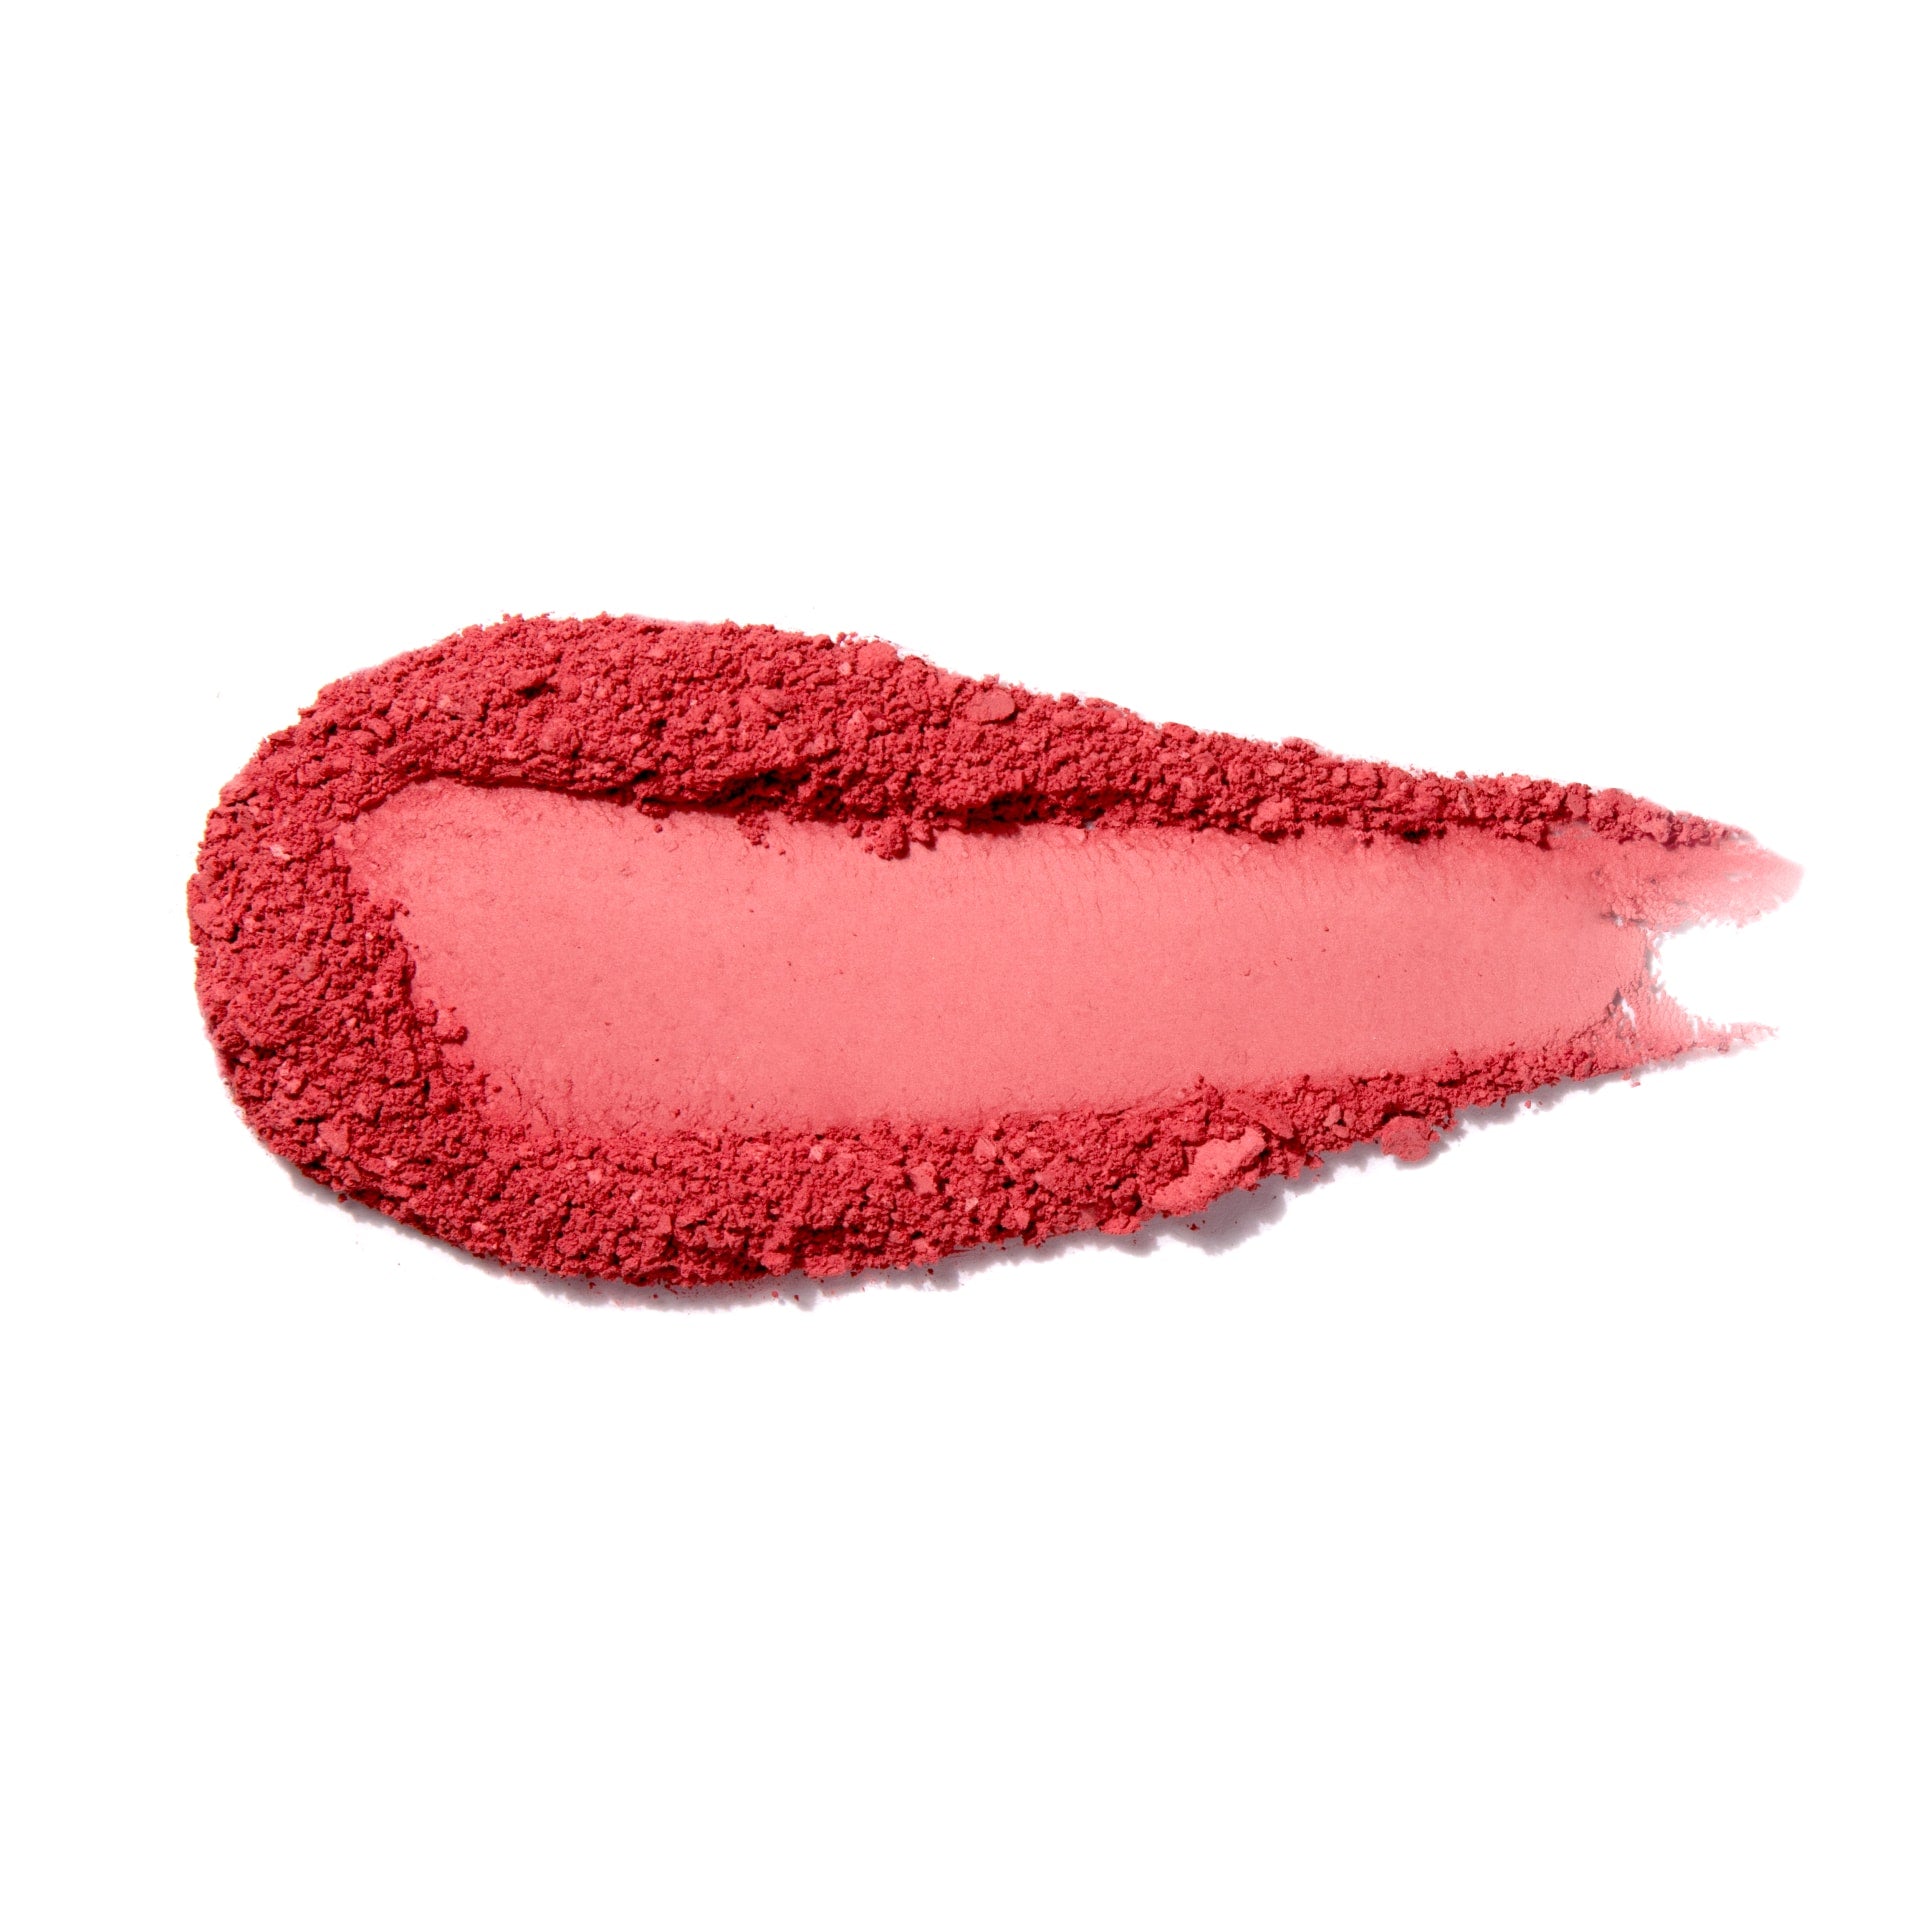 100% PURE Fruit Pigmented Blush berry